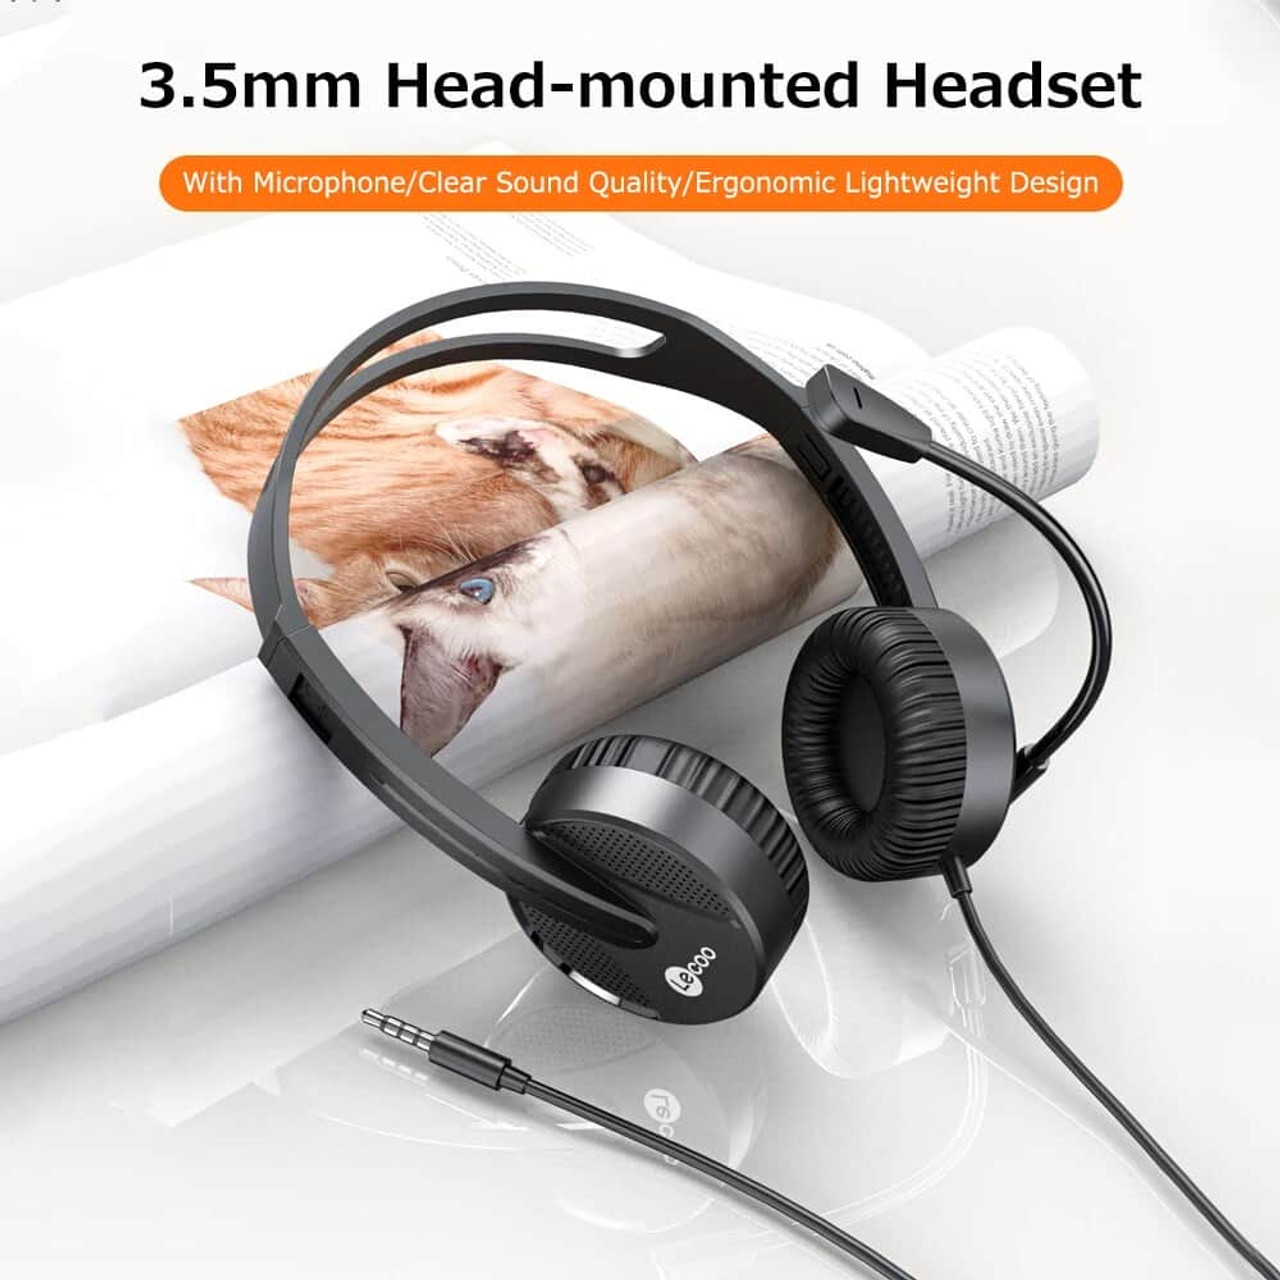 Lenovo Lecoo HT106 3.5mm Wired Head-mounted Headset with Adjustable Microphone for Voice Call Web Conference Online Teaching